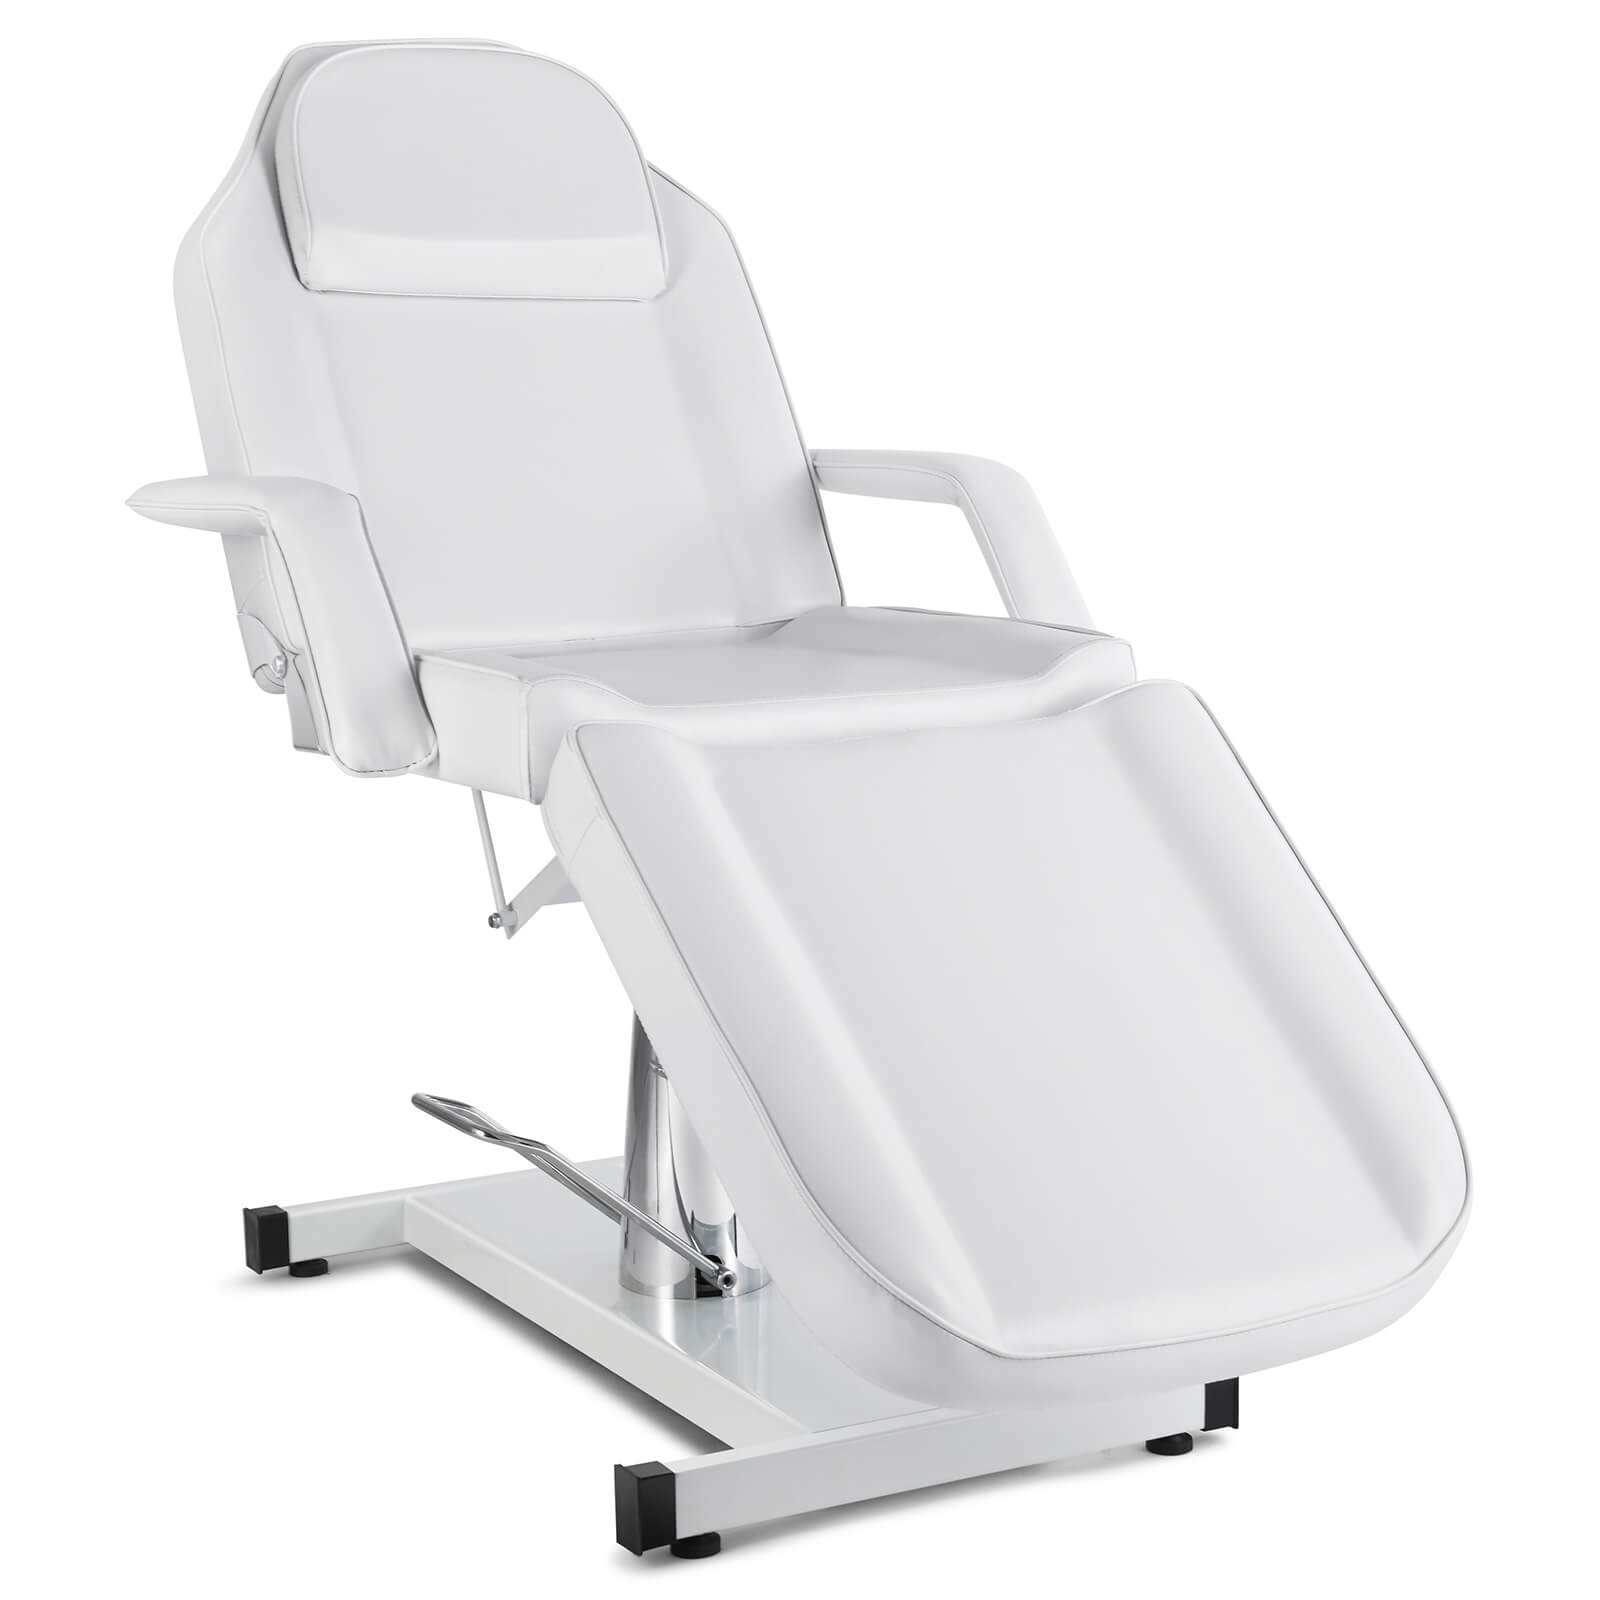 #2005 Hydraulic Facial Table Tattoo Chair Massage Bed